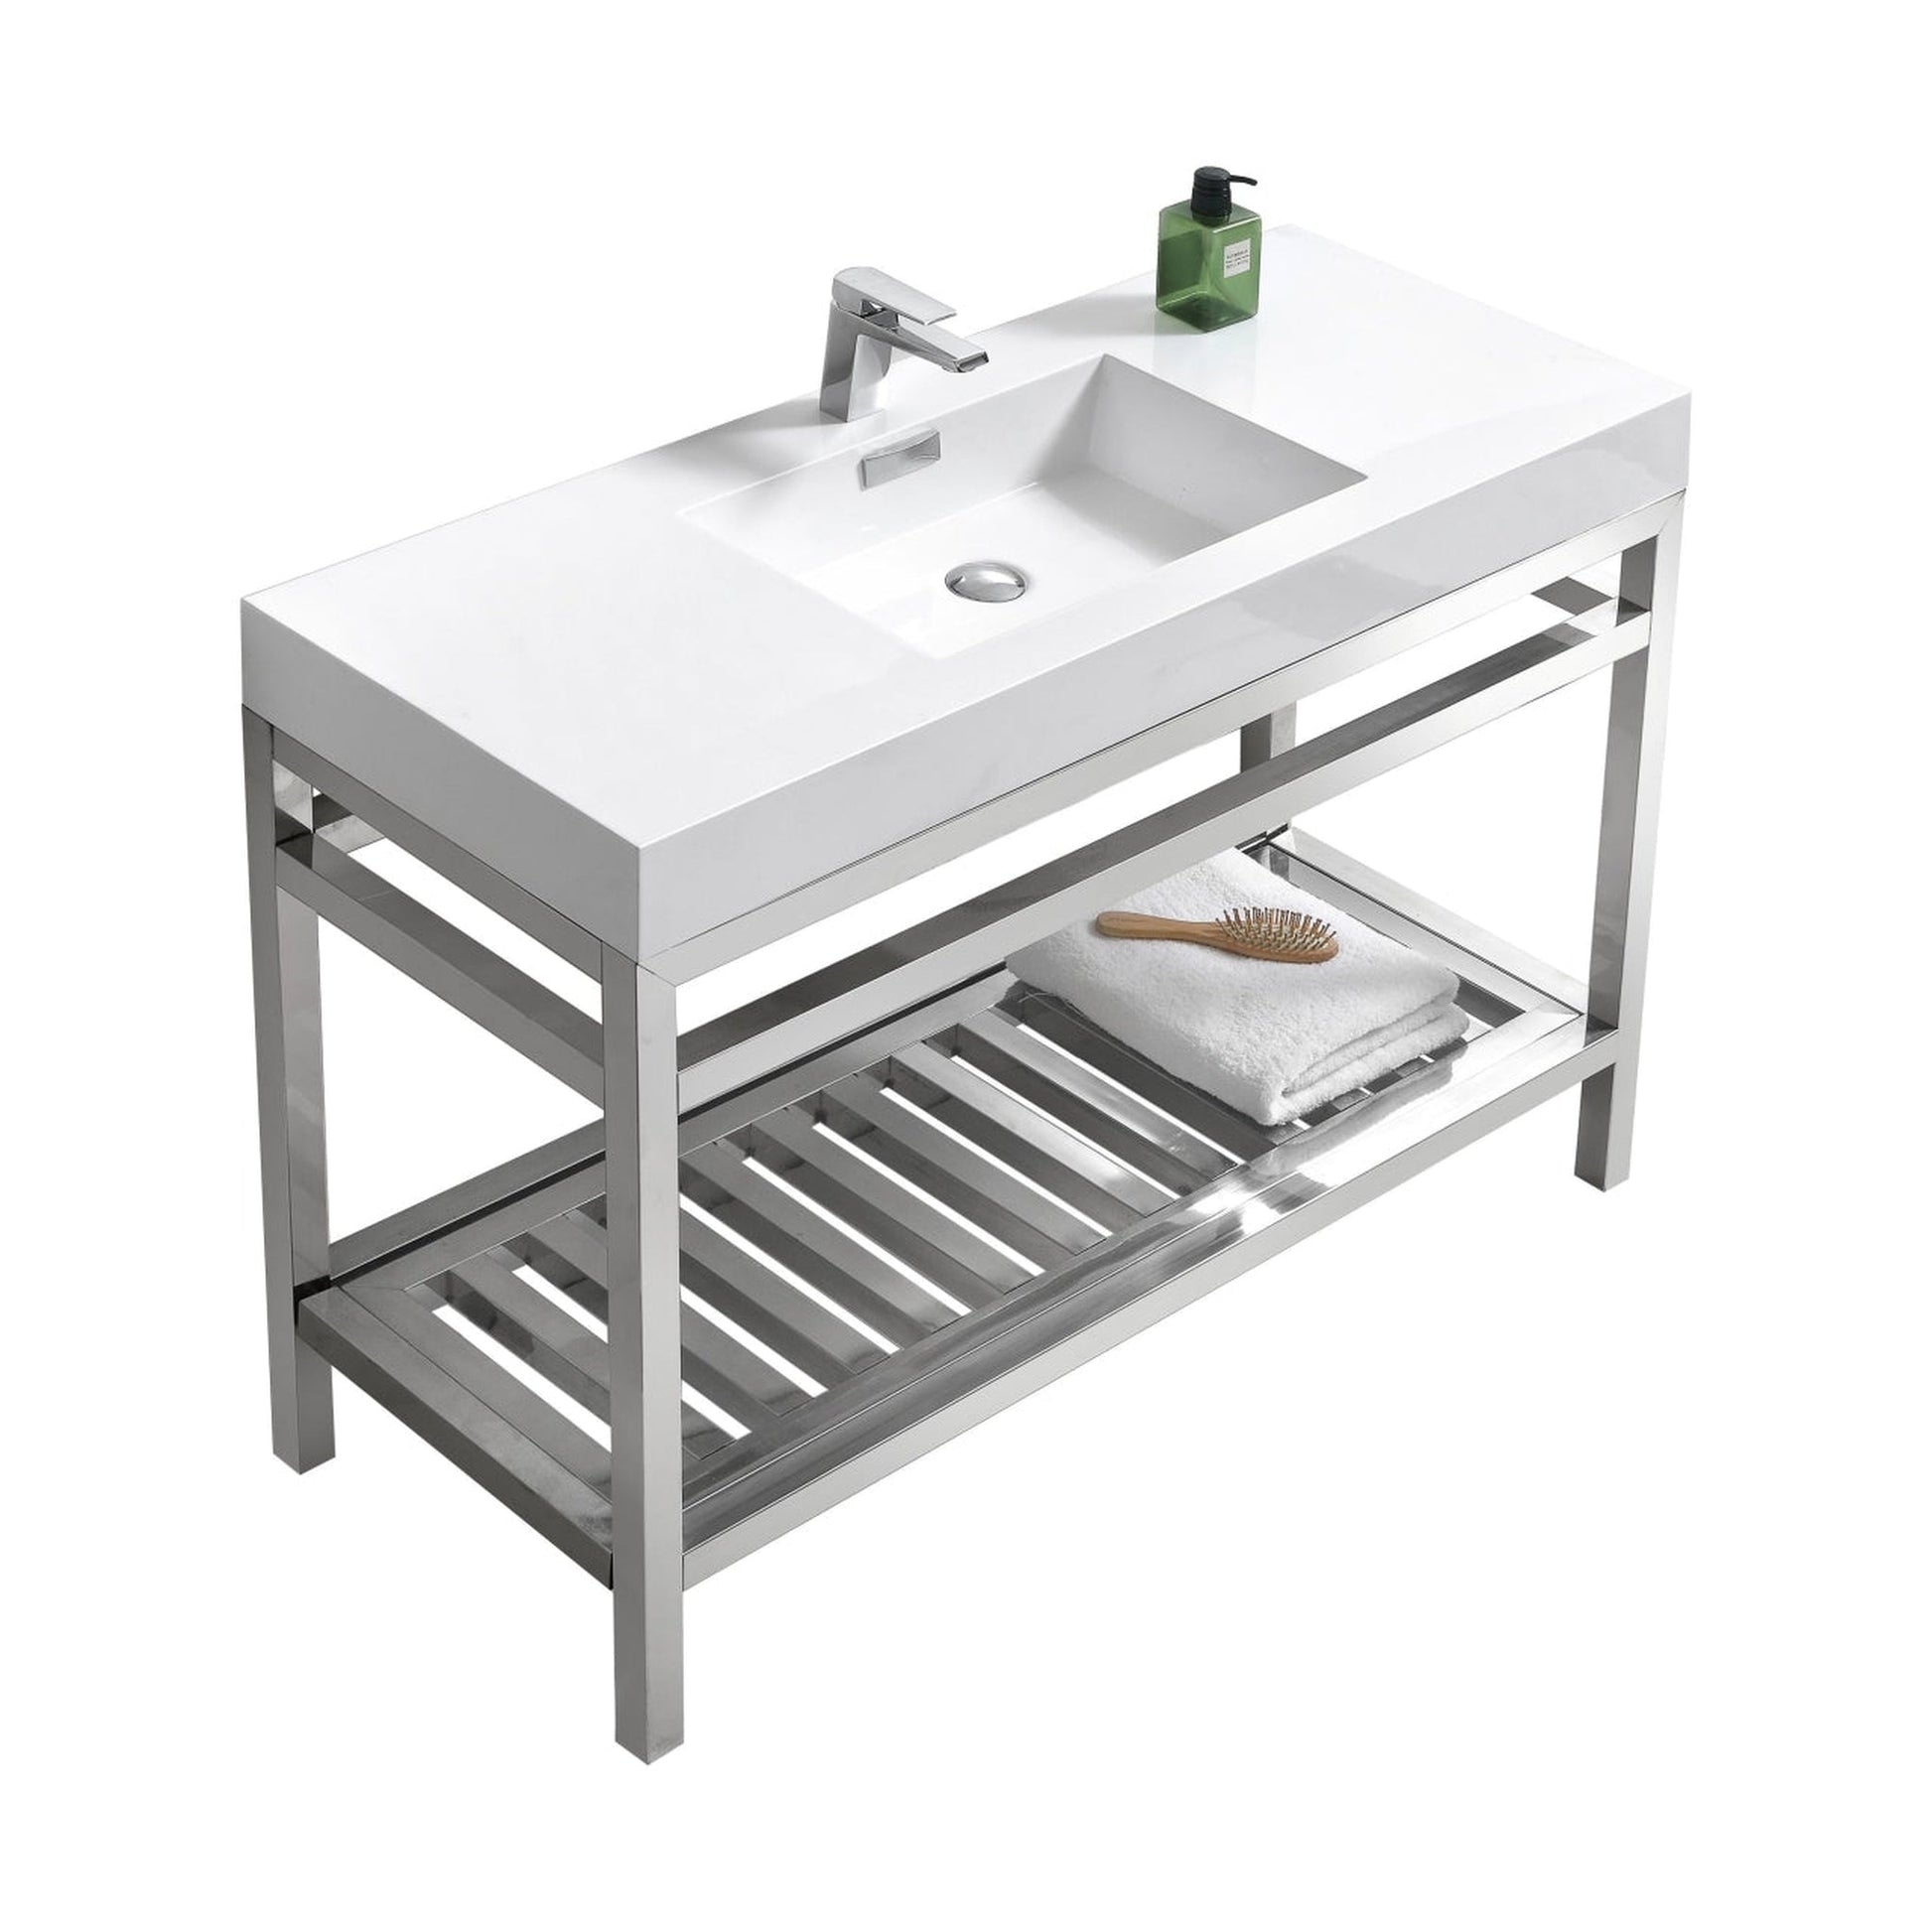 KubeBath Cisco 48" Stainless Steel Chrome Console Freestanding Modern Bathroom Vanity With Single Integrated Acrylic Sink With Overflow and 48" White Framed Mirror